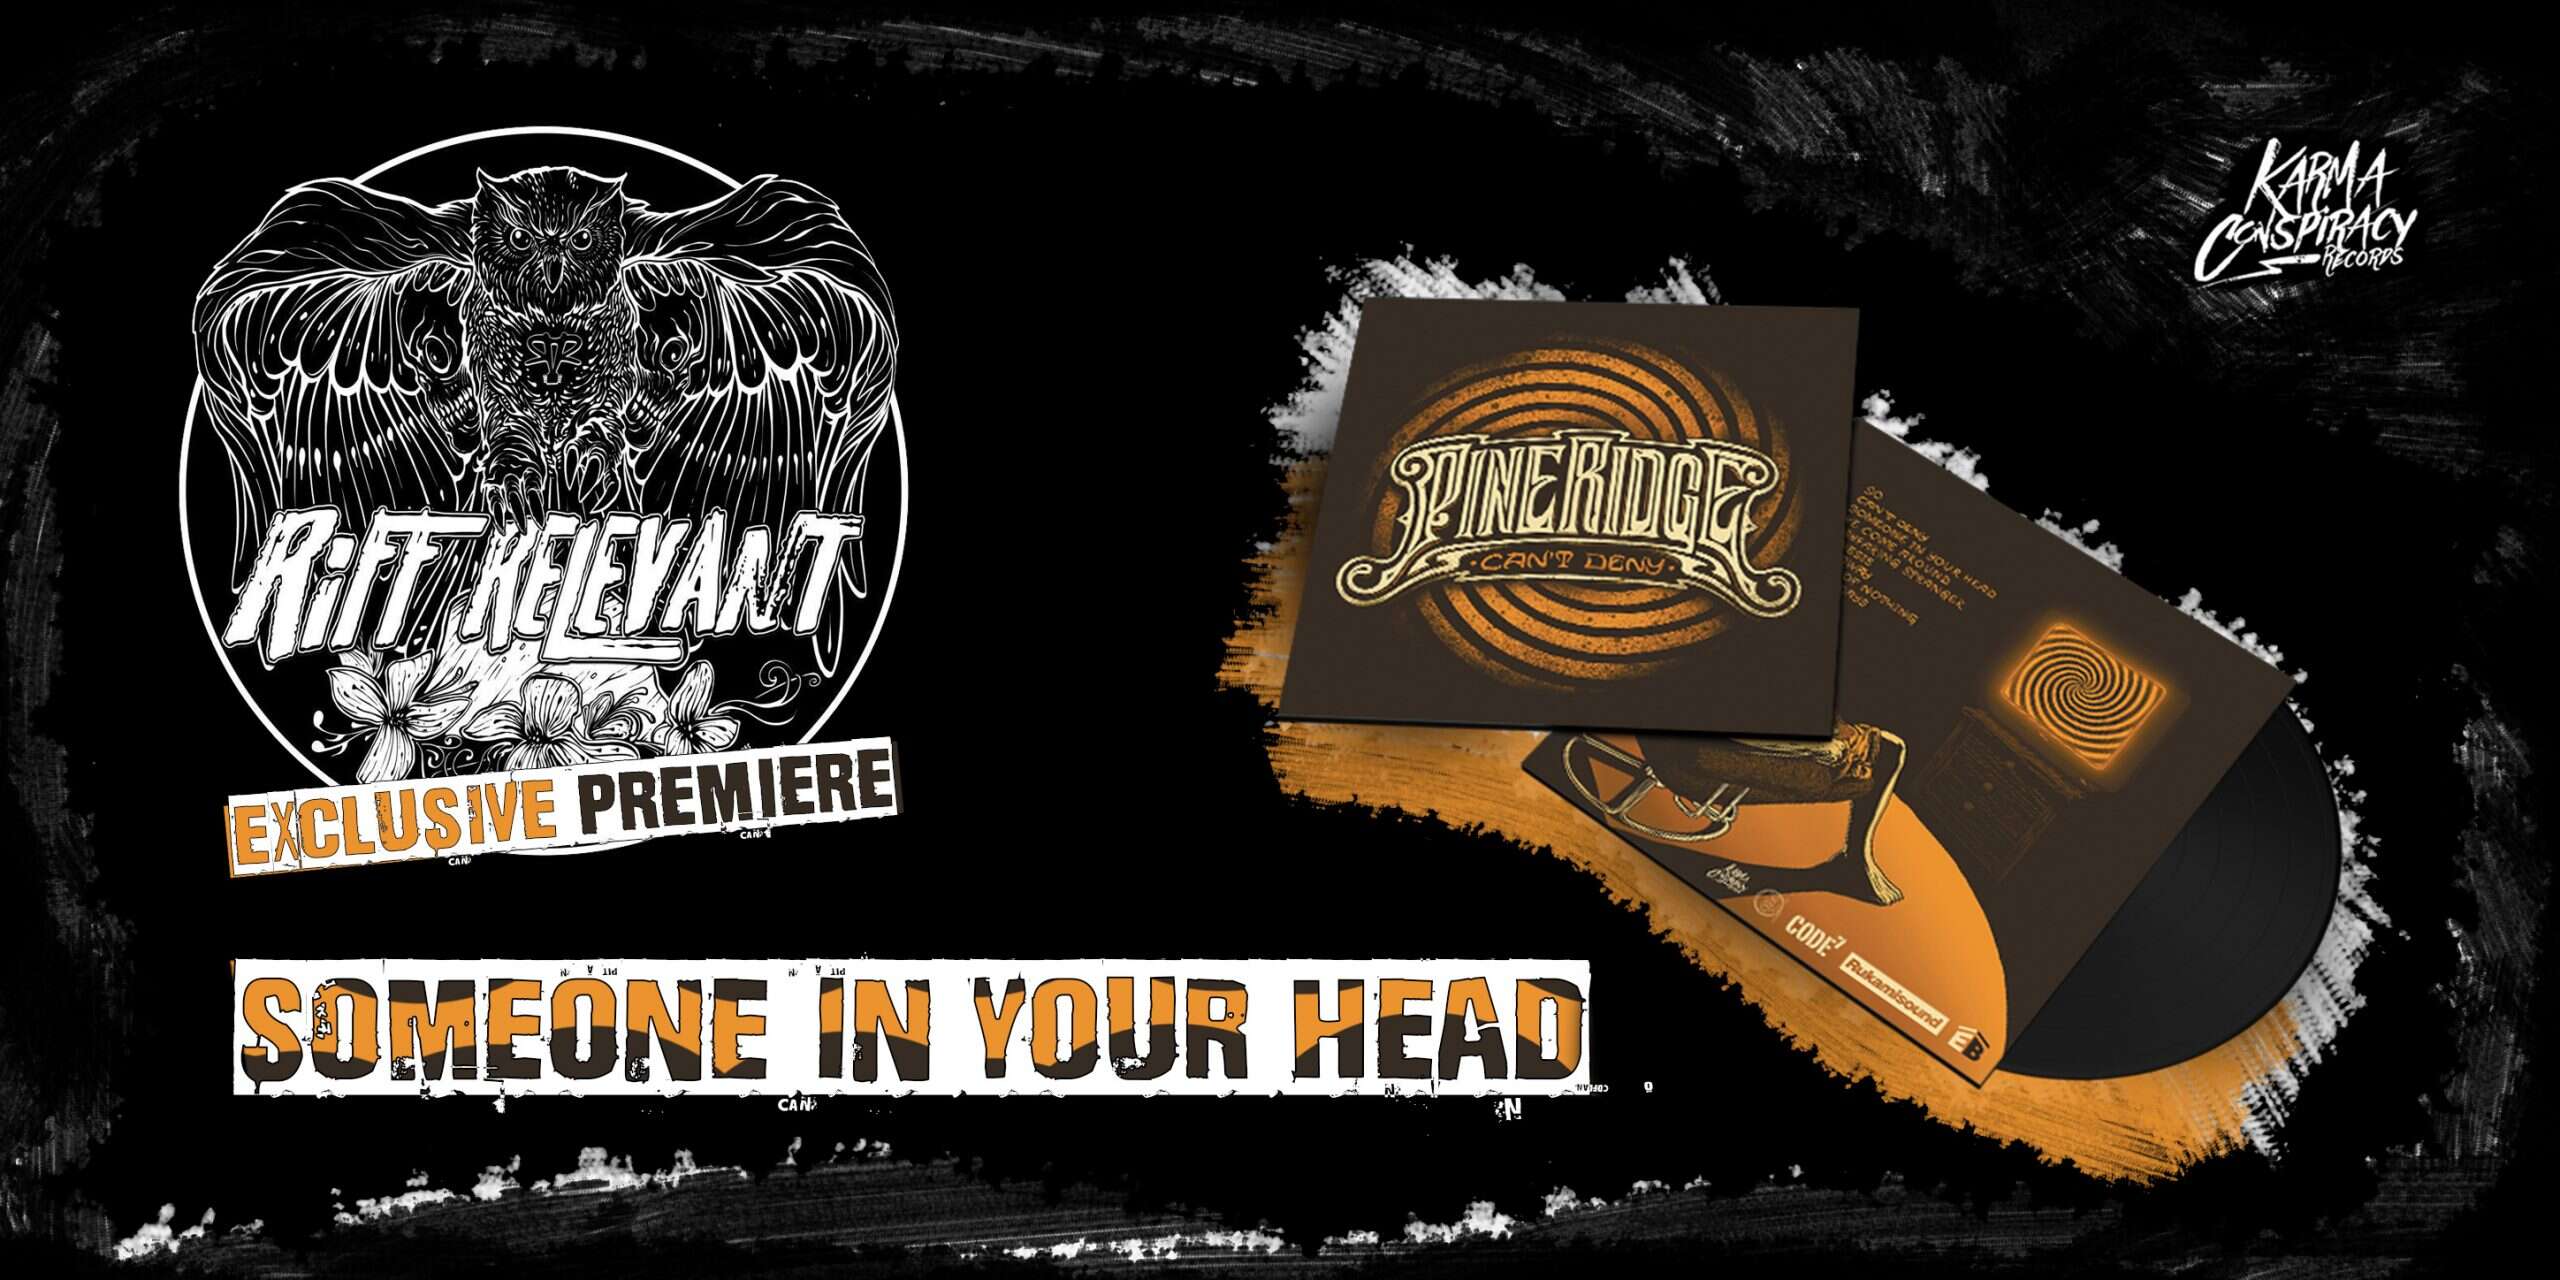 Riffrelevant exclusive premiere of "Someone in your head" by PINE RIDGE band